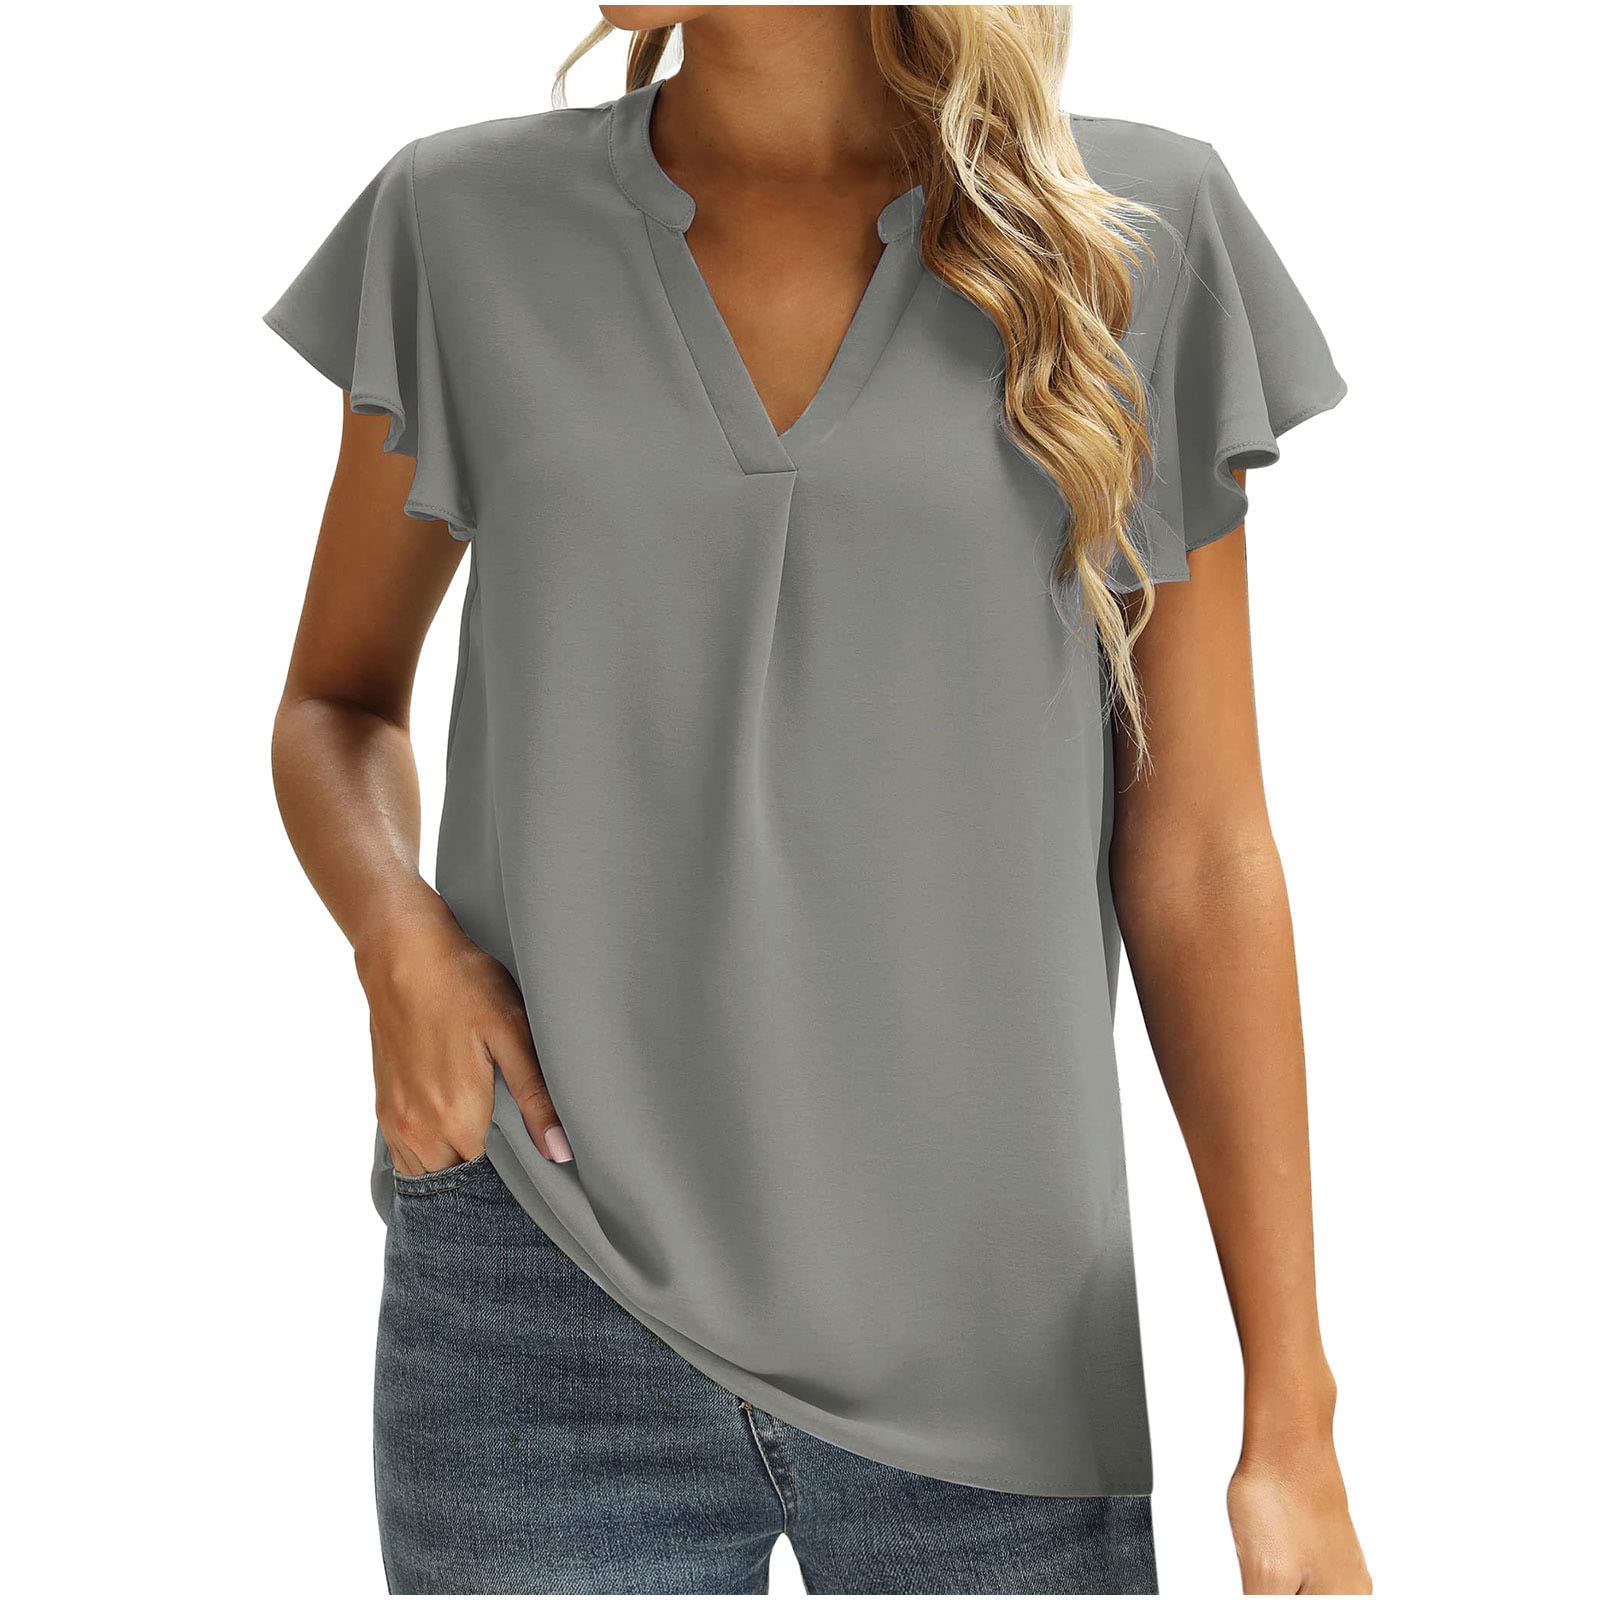 Women's Ruffle Short Sleeve Tops V Neck T-Shirts Solid Color Blouse Casual  Summer Tunic Tops 02-gray XX-Large